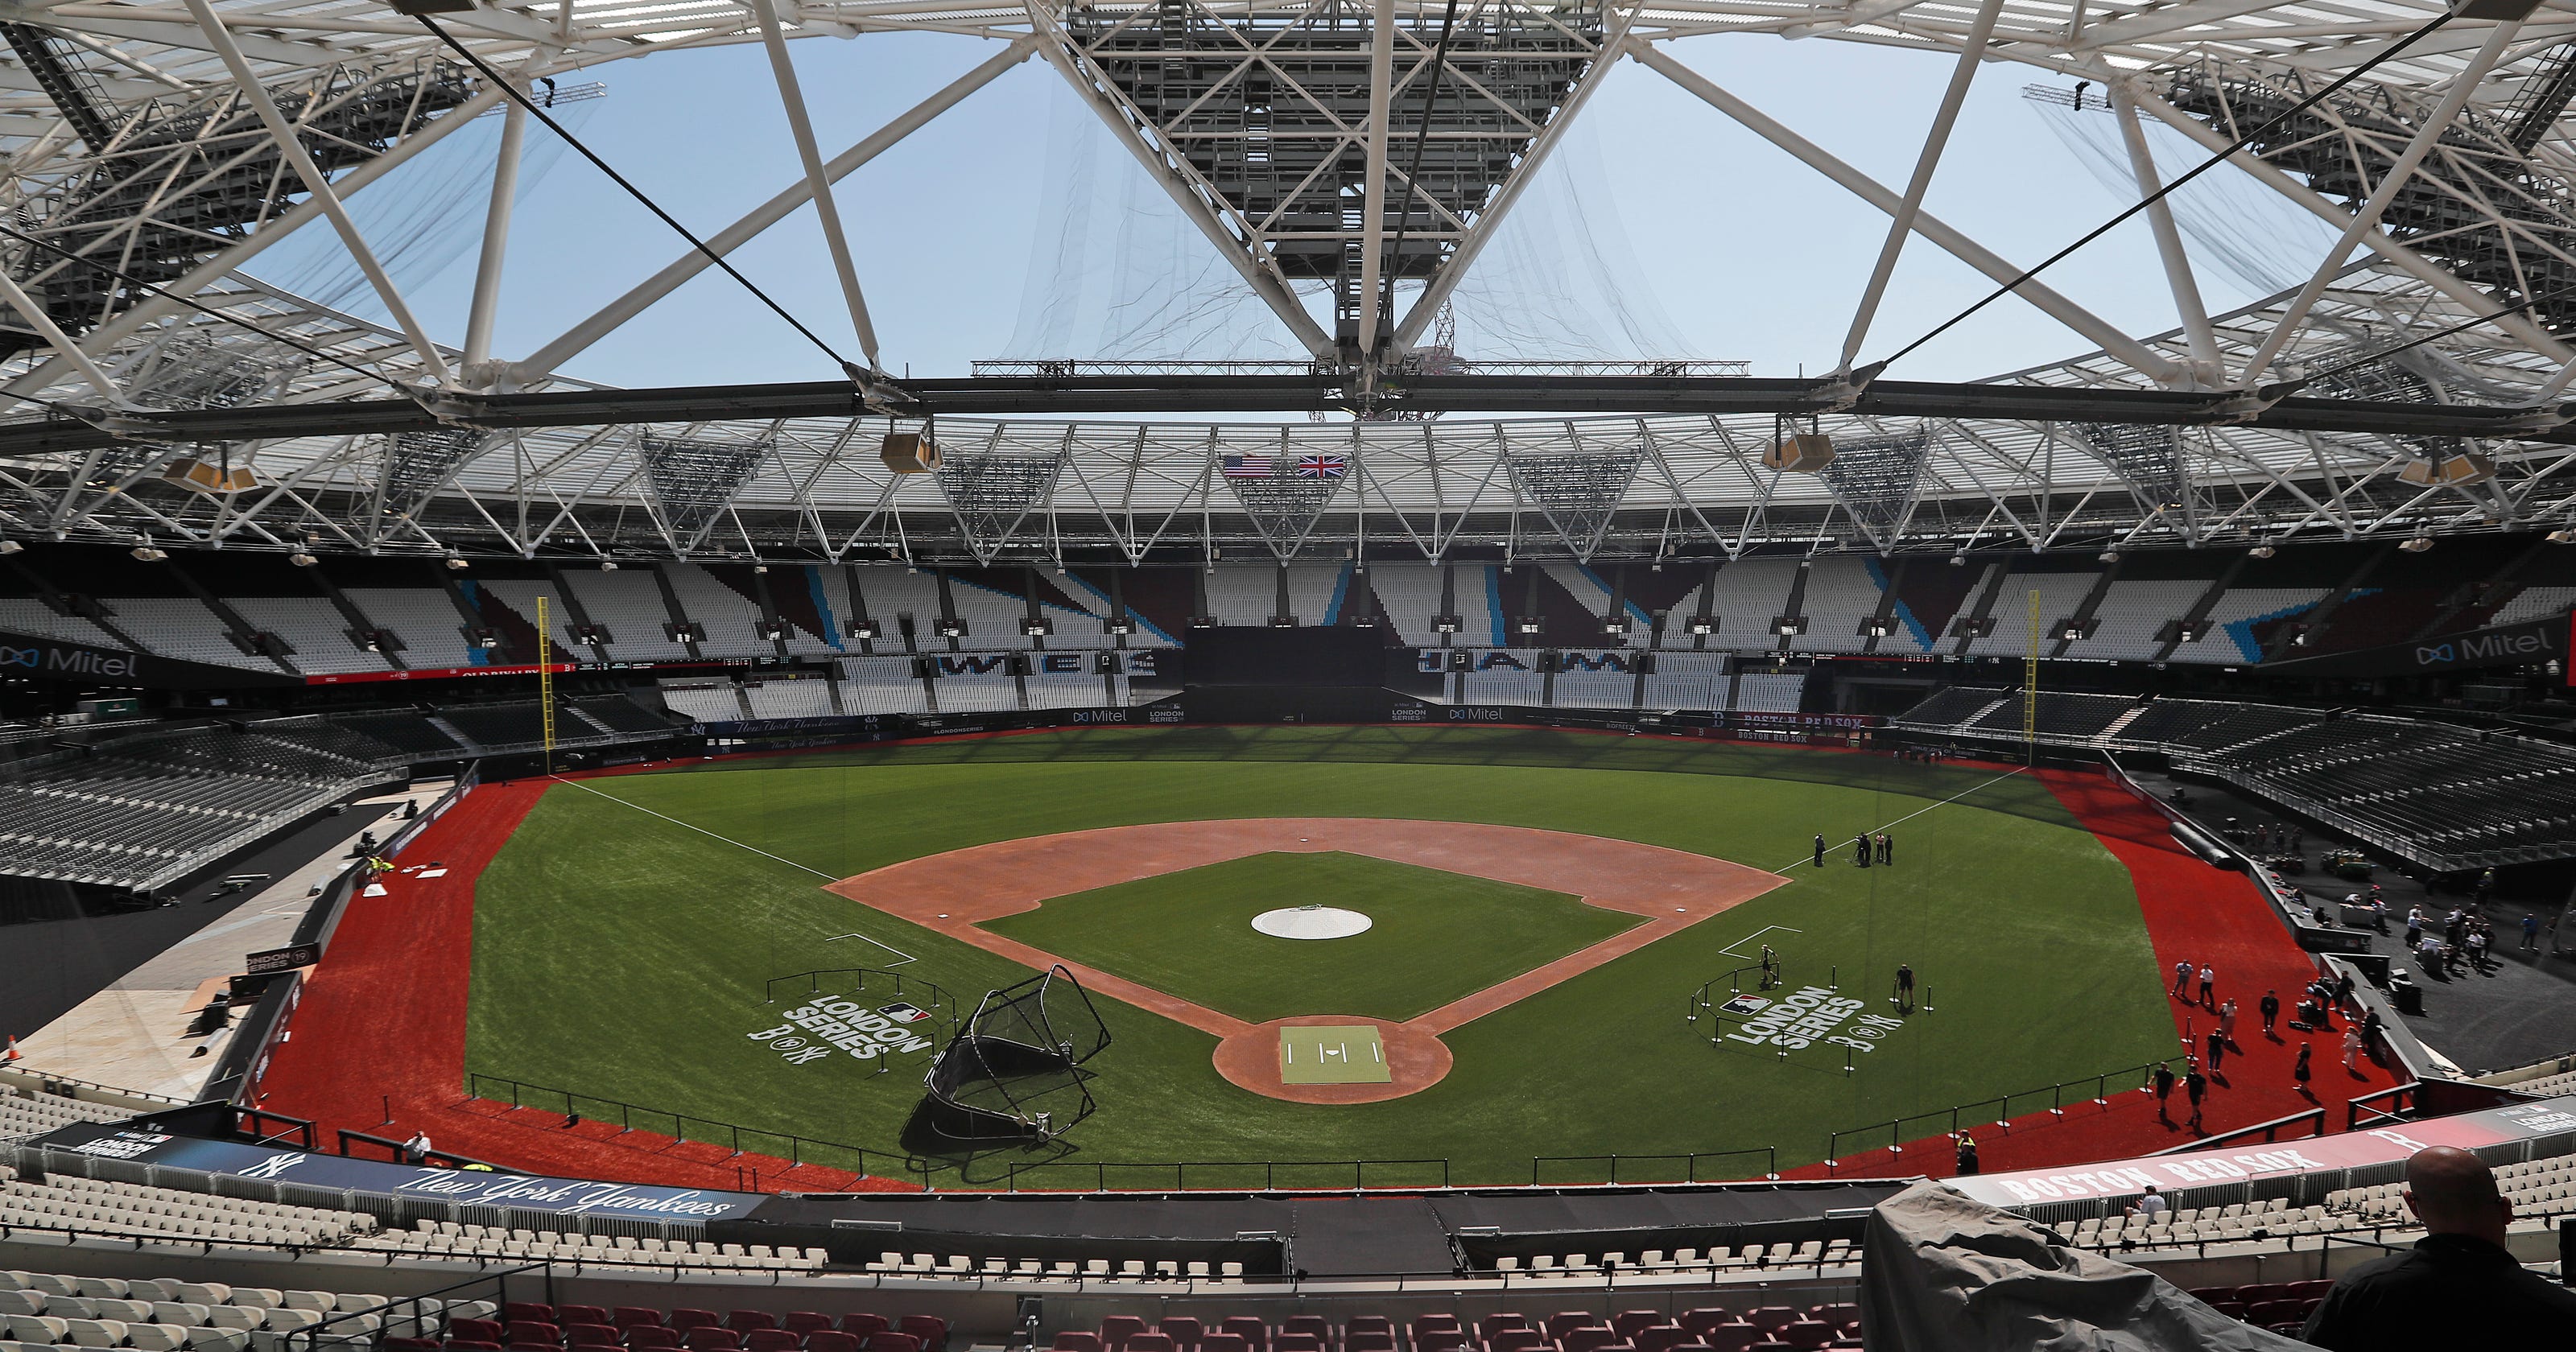 MLB London Series Stadium dimensions mean homers for Red Sox, Yankees